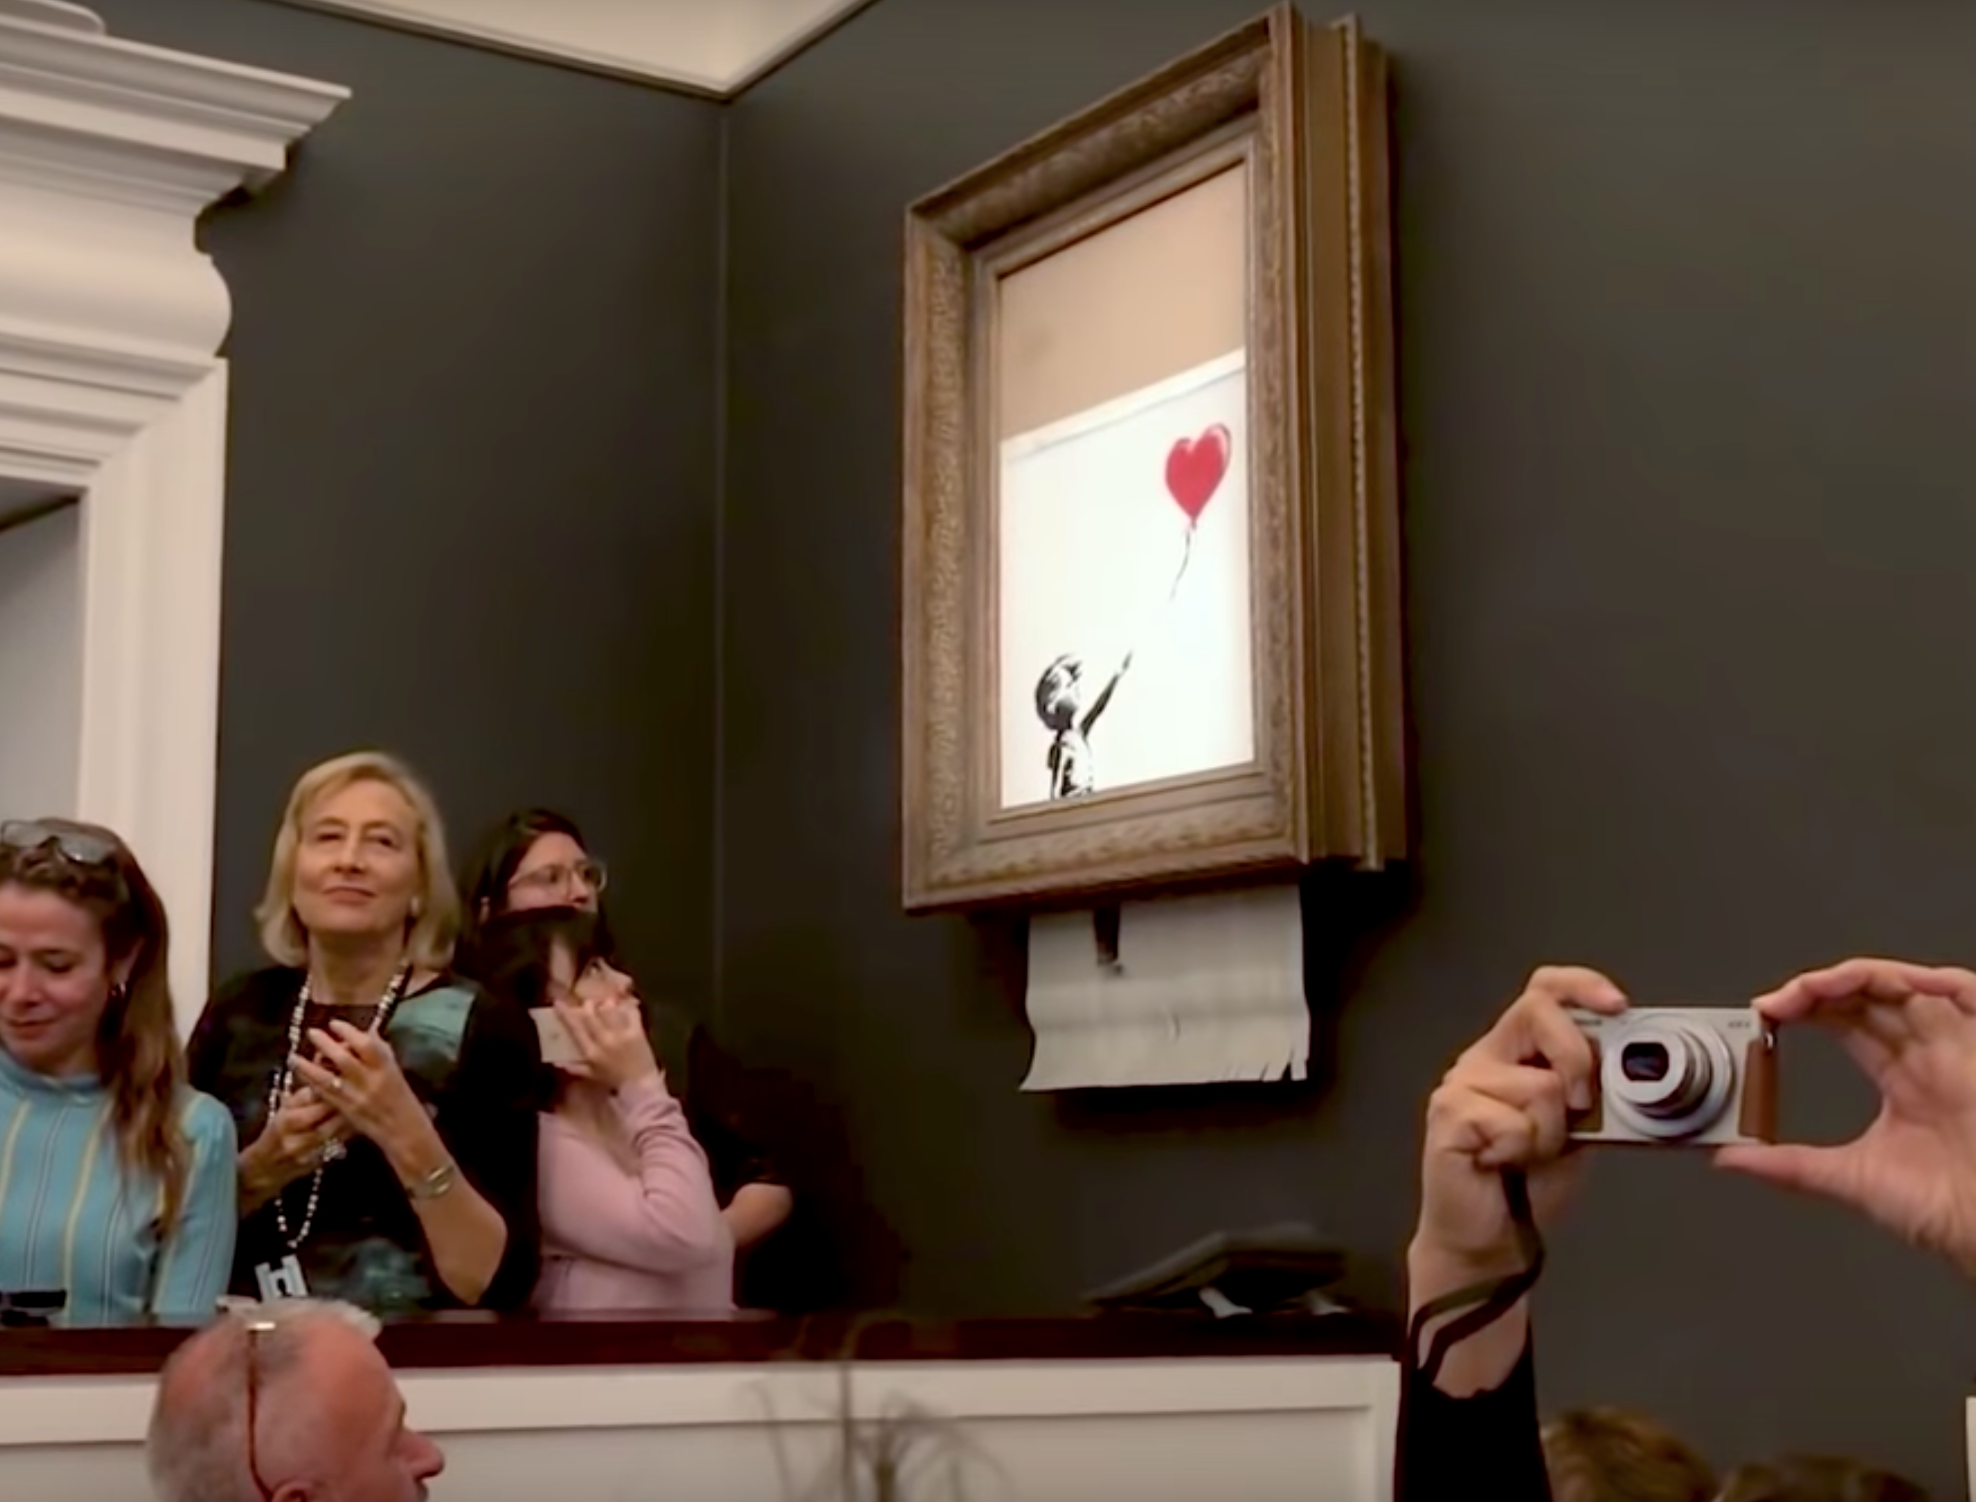 Listen to a Player Piano Version of Tom Waits' "Innocent When You Dream" From Banksy’s Walled Off Hotel Lobby